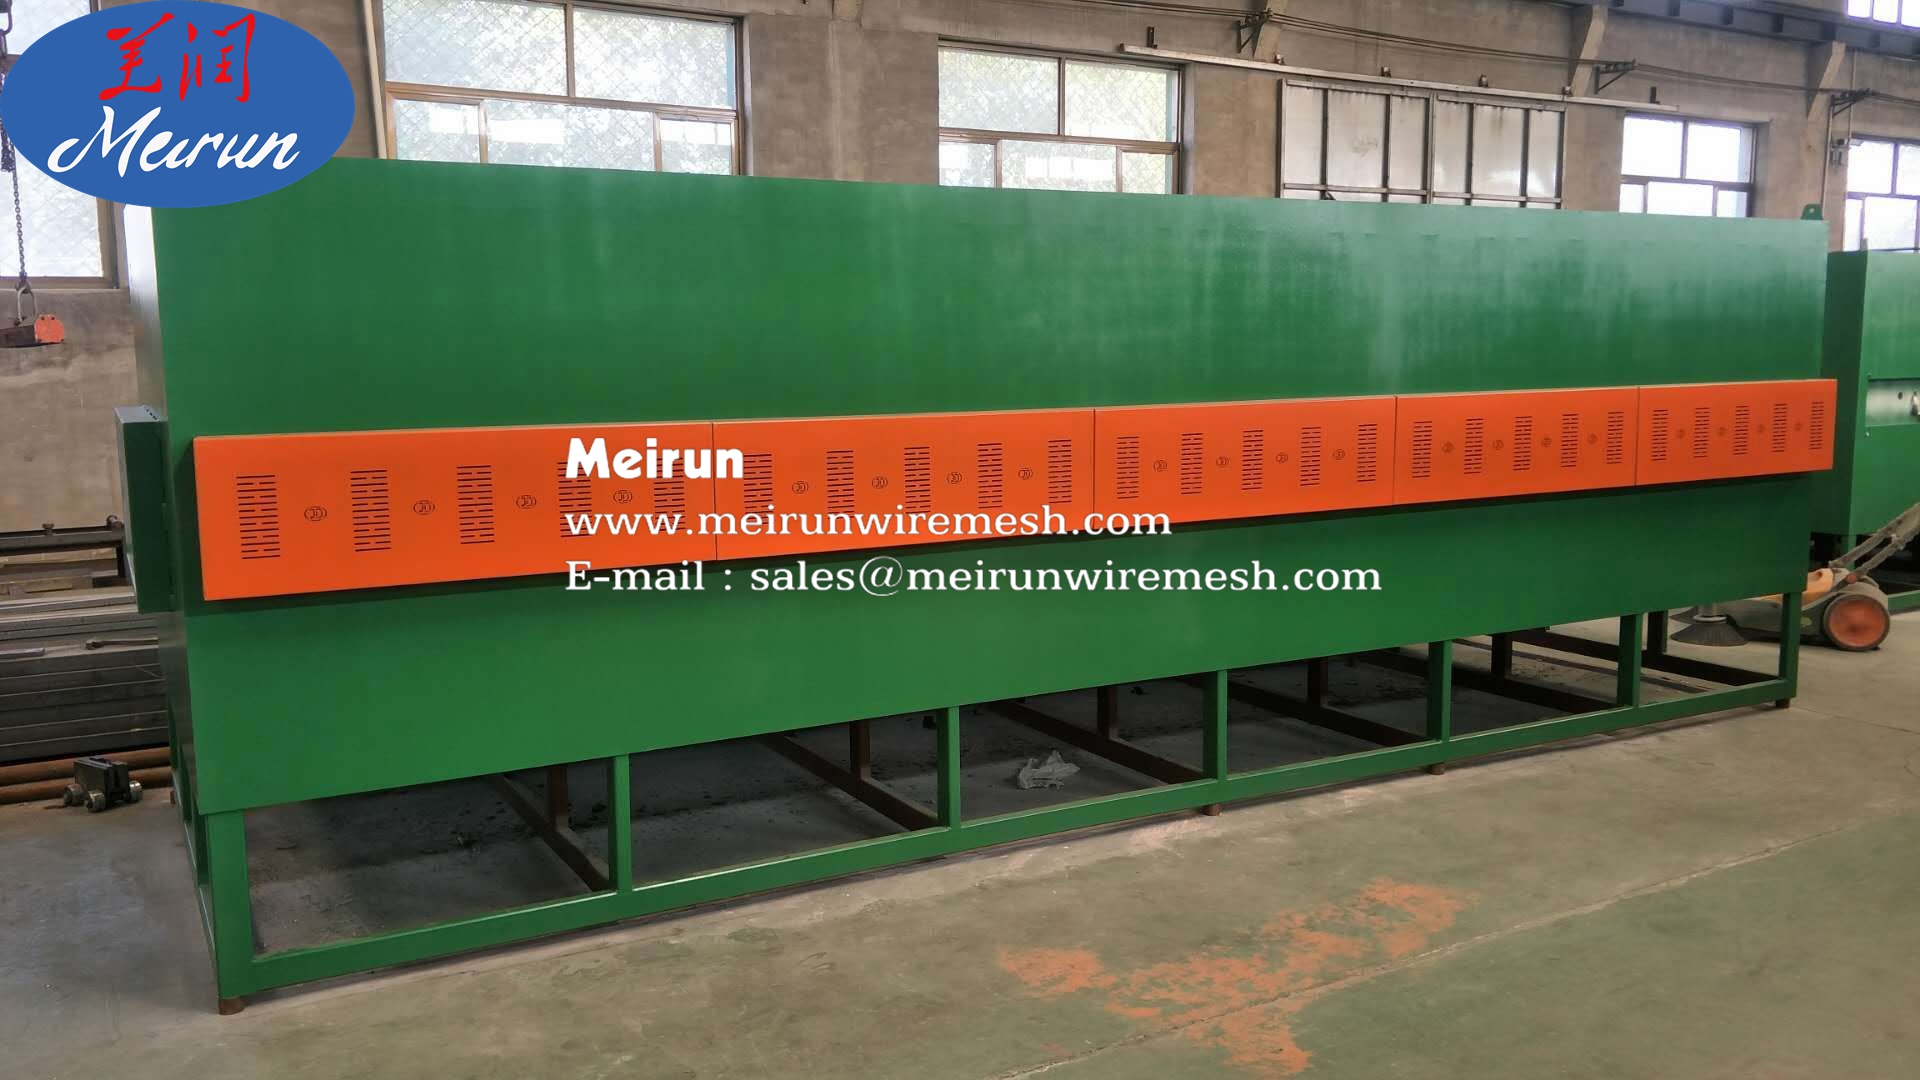 Continuous Gas heating heat treatment furnace